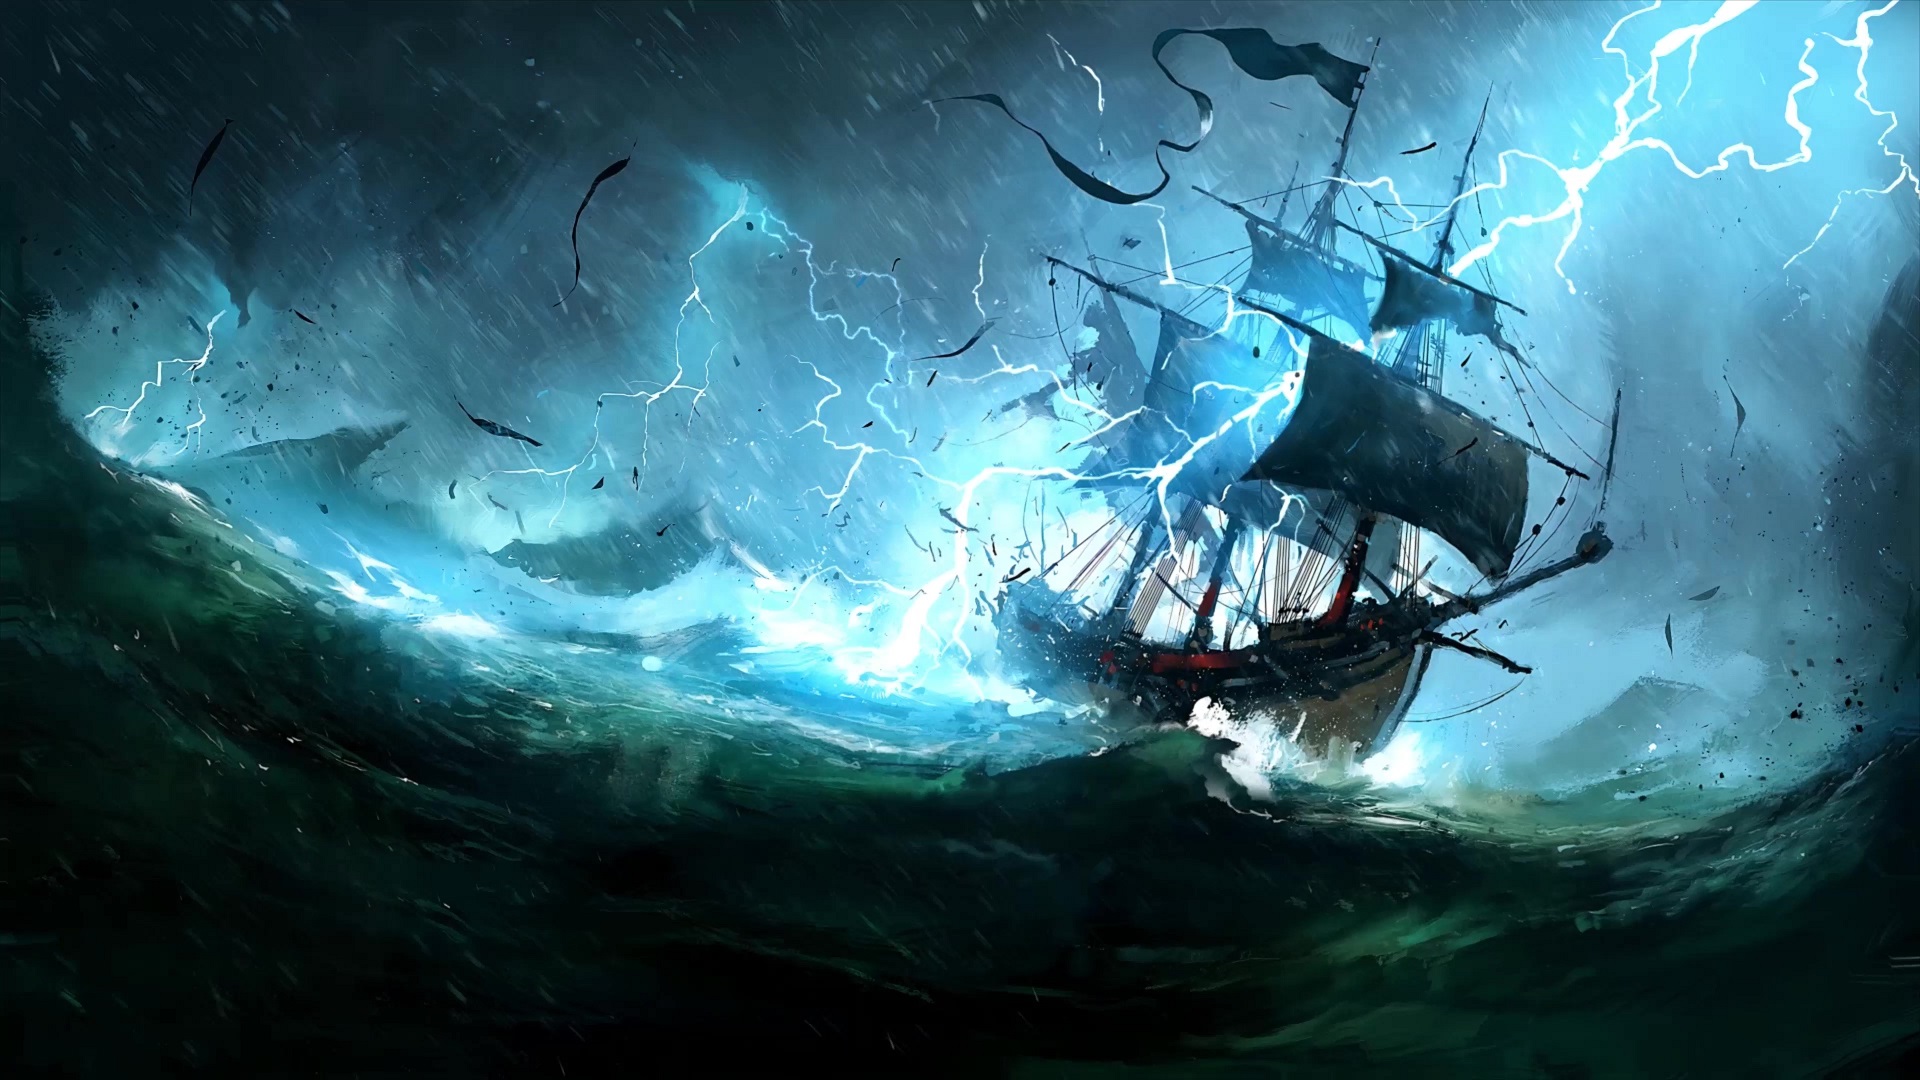 ASSASSINS CREED BLACK FLAG fantasy fighting action stealth adventure pirate  wallpaper  4000x1790  609744  WallpaperUP